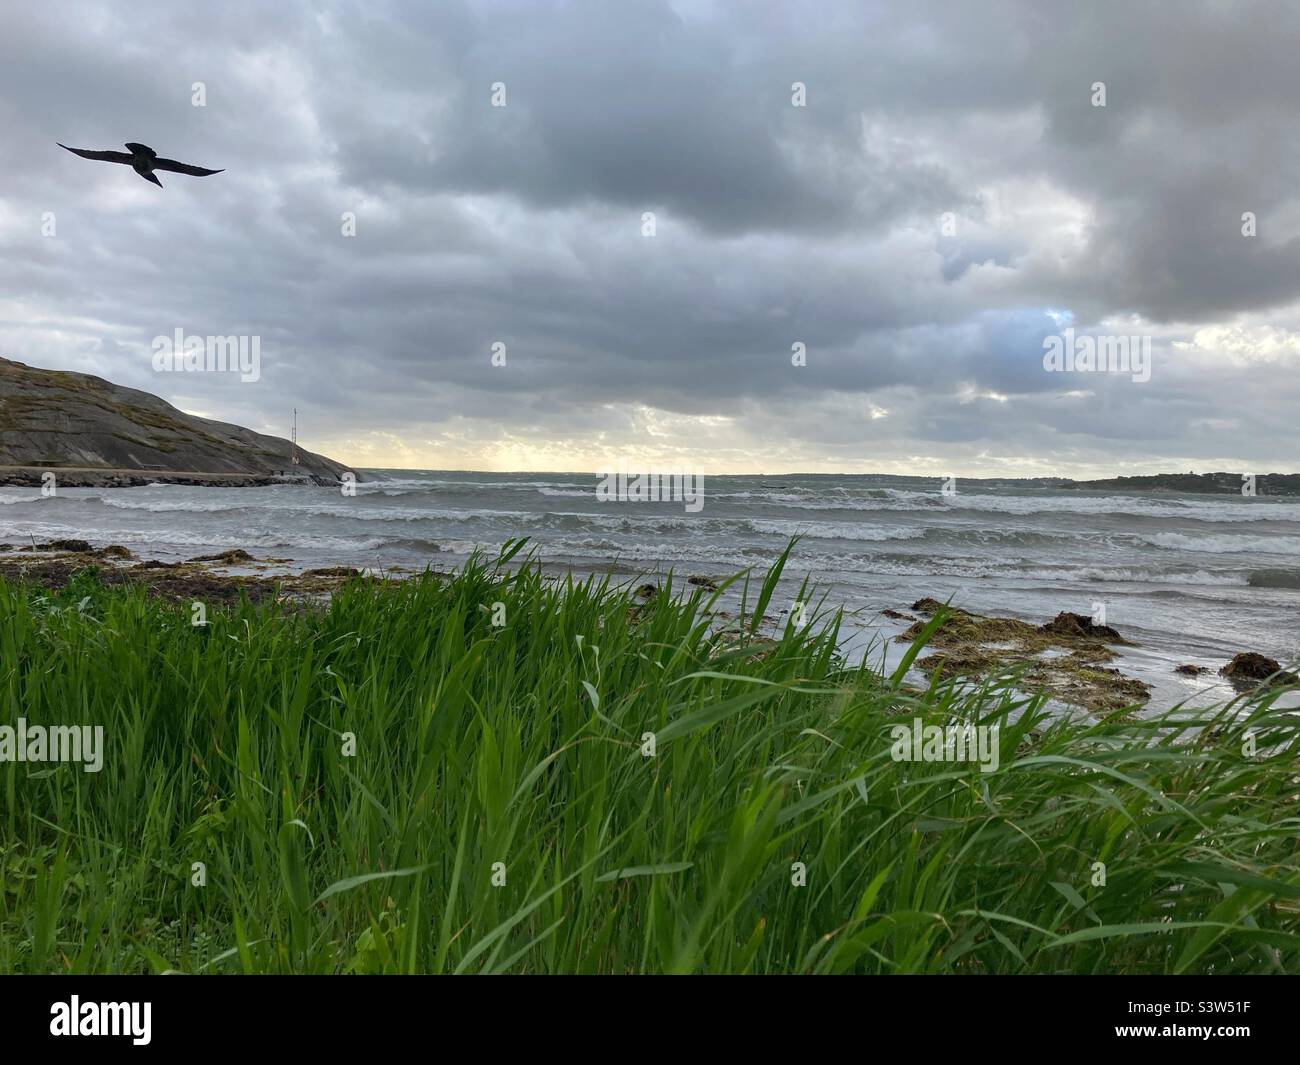 A crow flying in the strong wind over a Beach on the West Swedish baltic sea Coast, Sweden Stock Photo